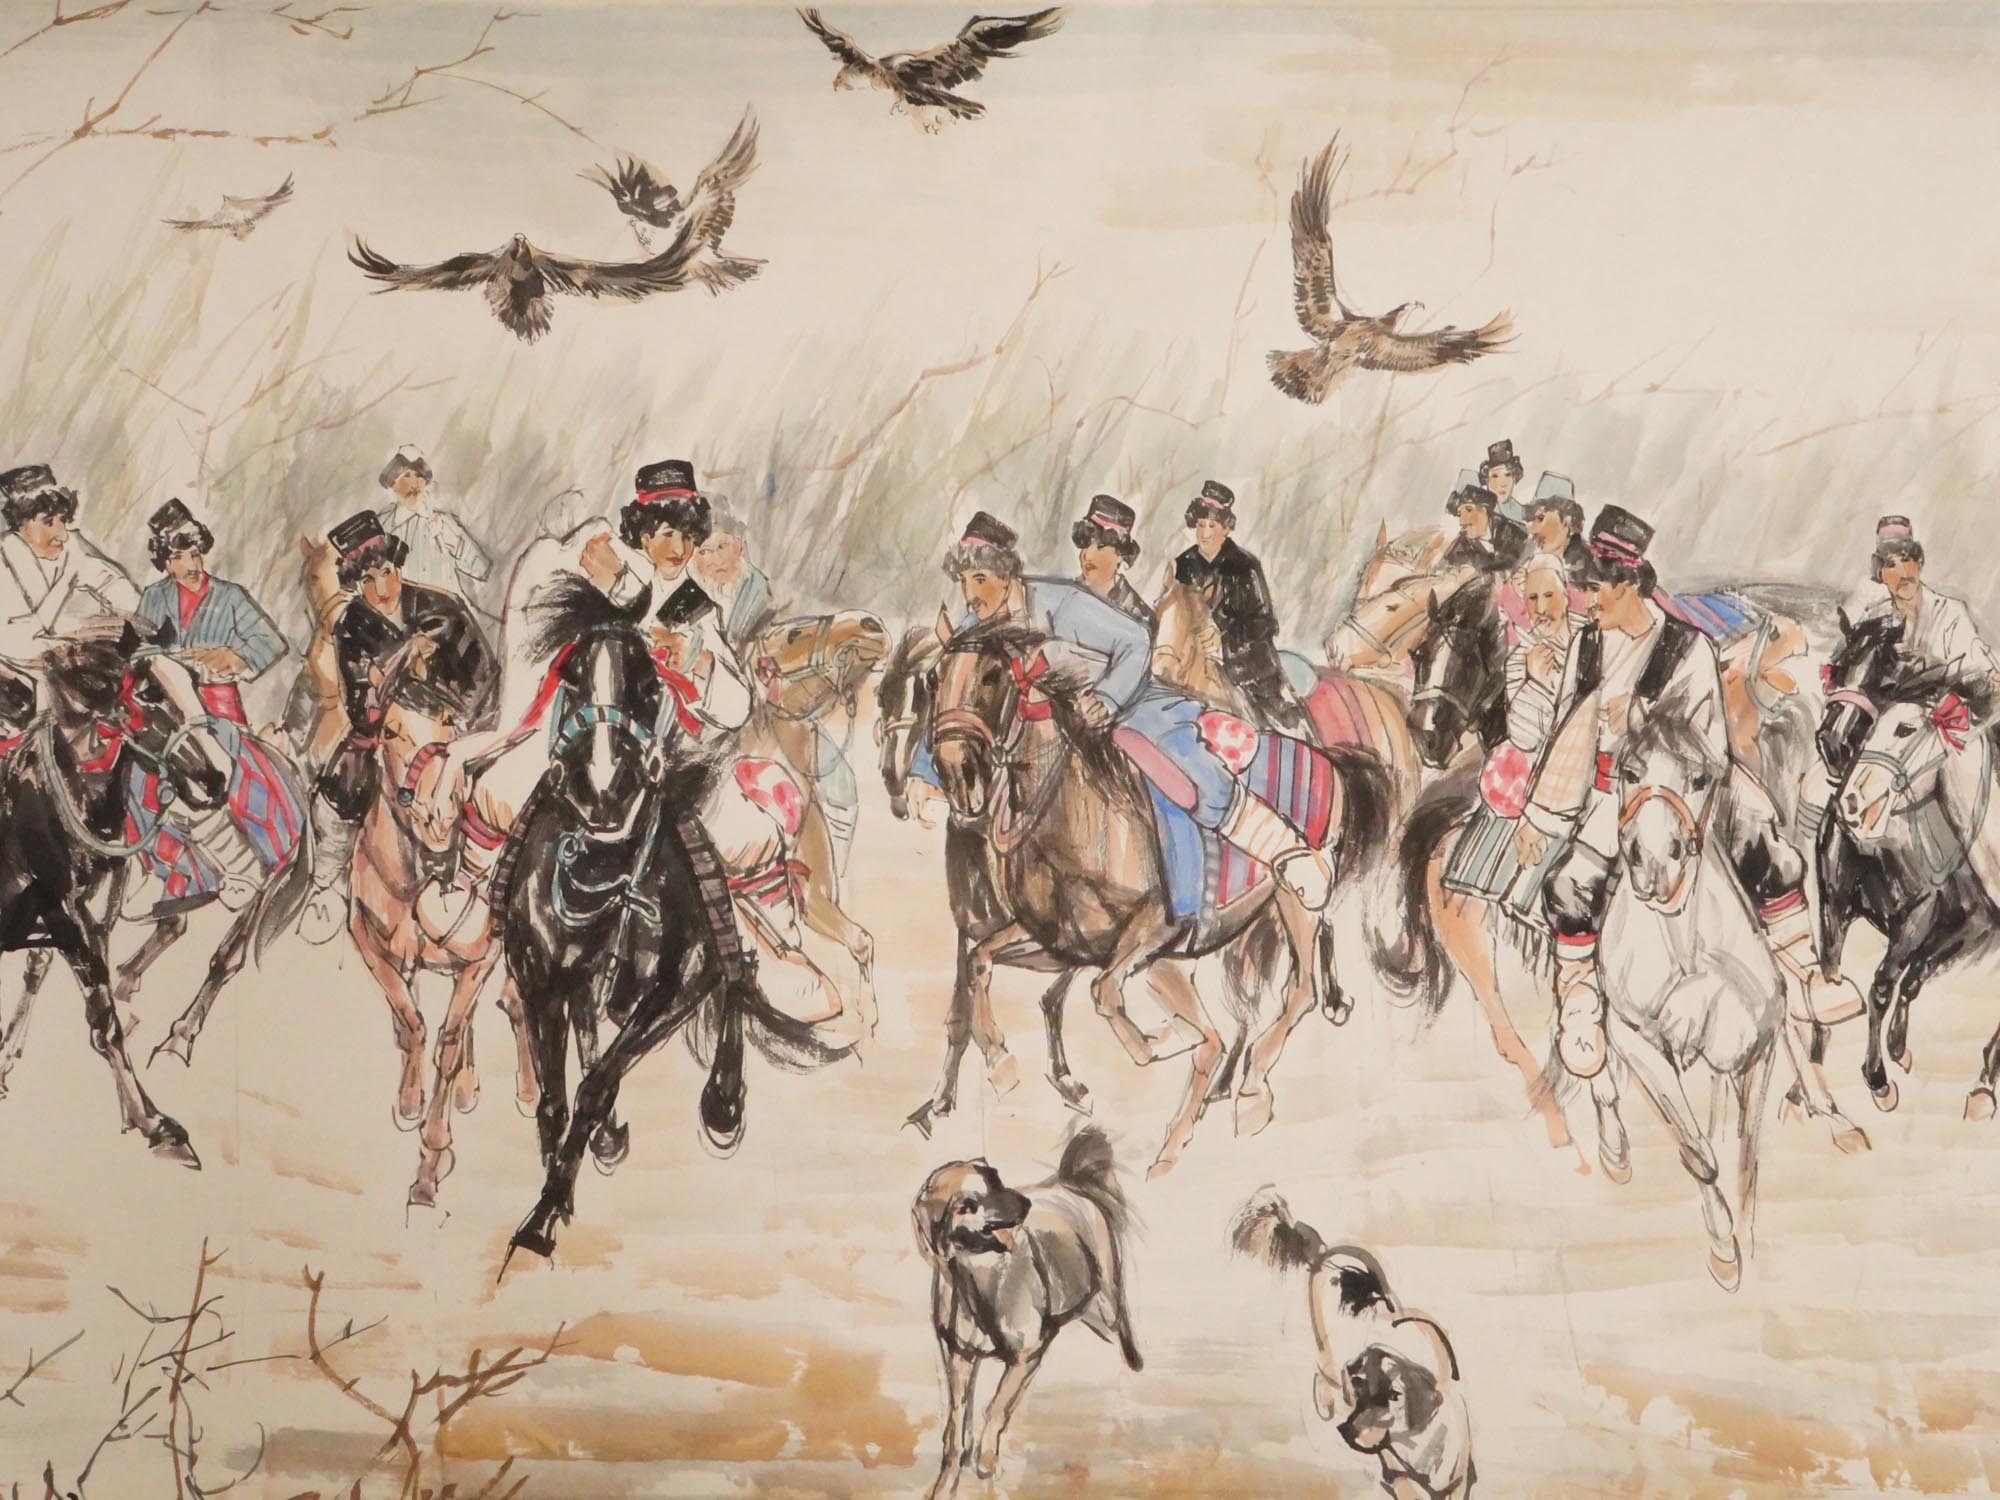 14 FEET LONG CHINESE PAINTING BY HUANG ZHOU PIC-2